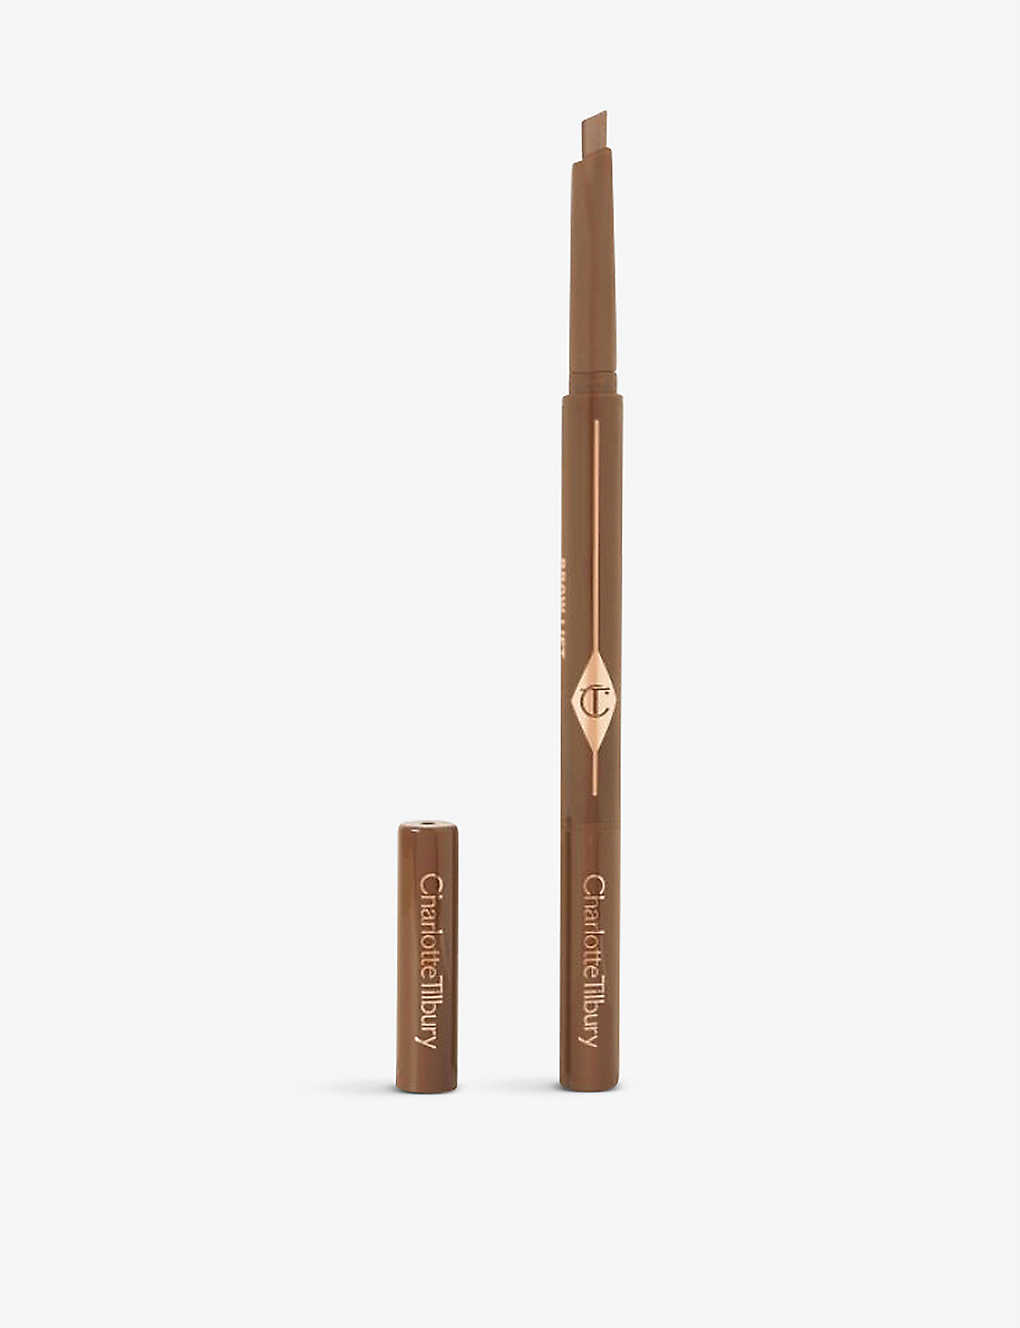 Charlotte Tilbury Brow Lift Eyebrow Pencil In Soft Brown